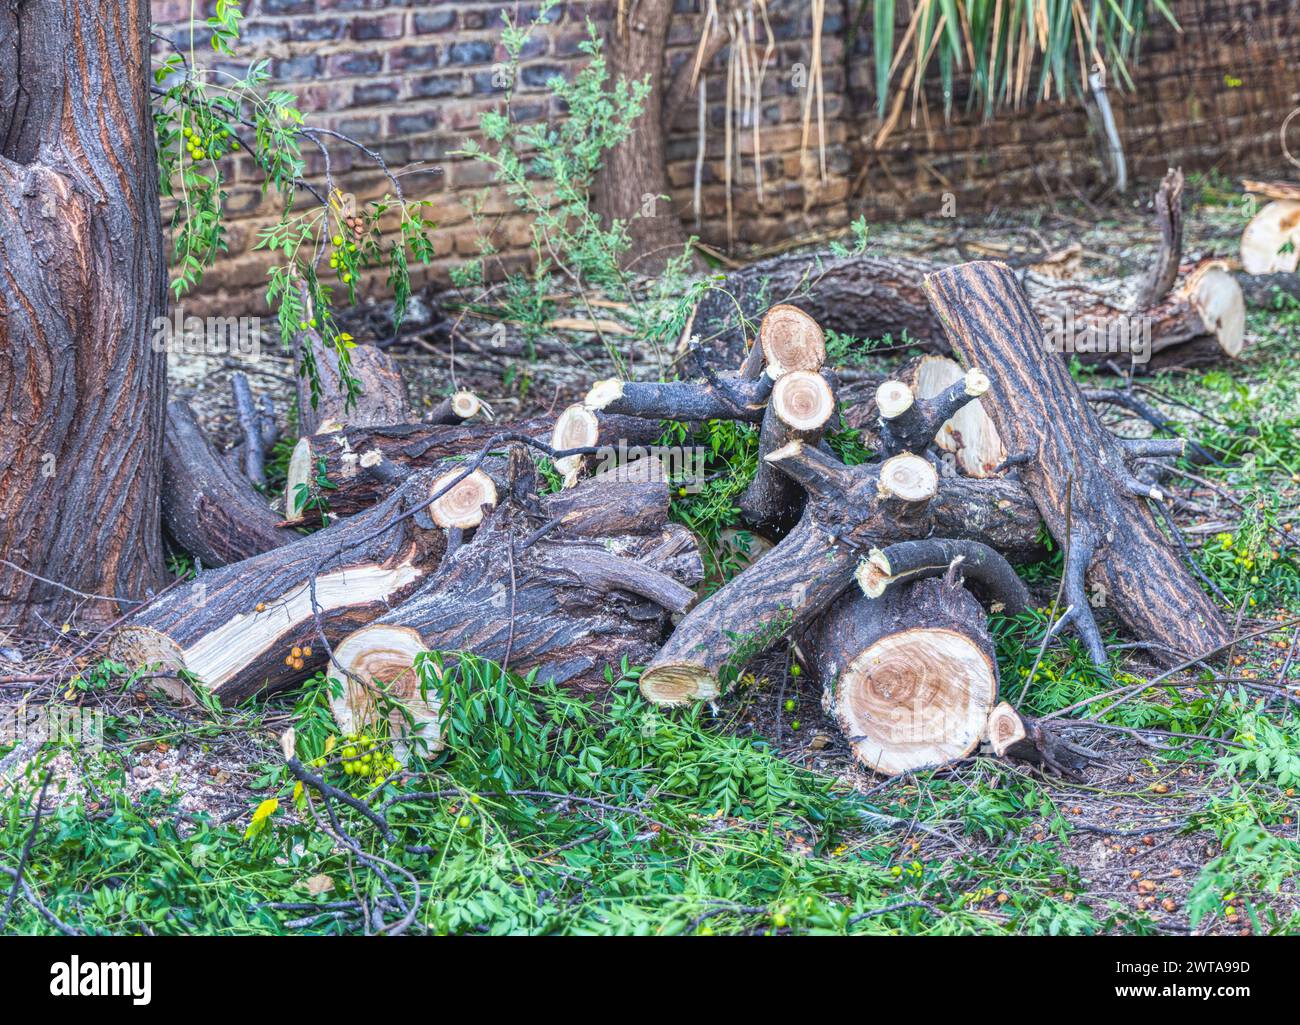 cutting trees, pruning branches and cleaning the yard, deforestation illegal cutting of wood Stock Photo